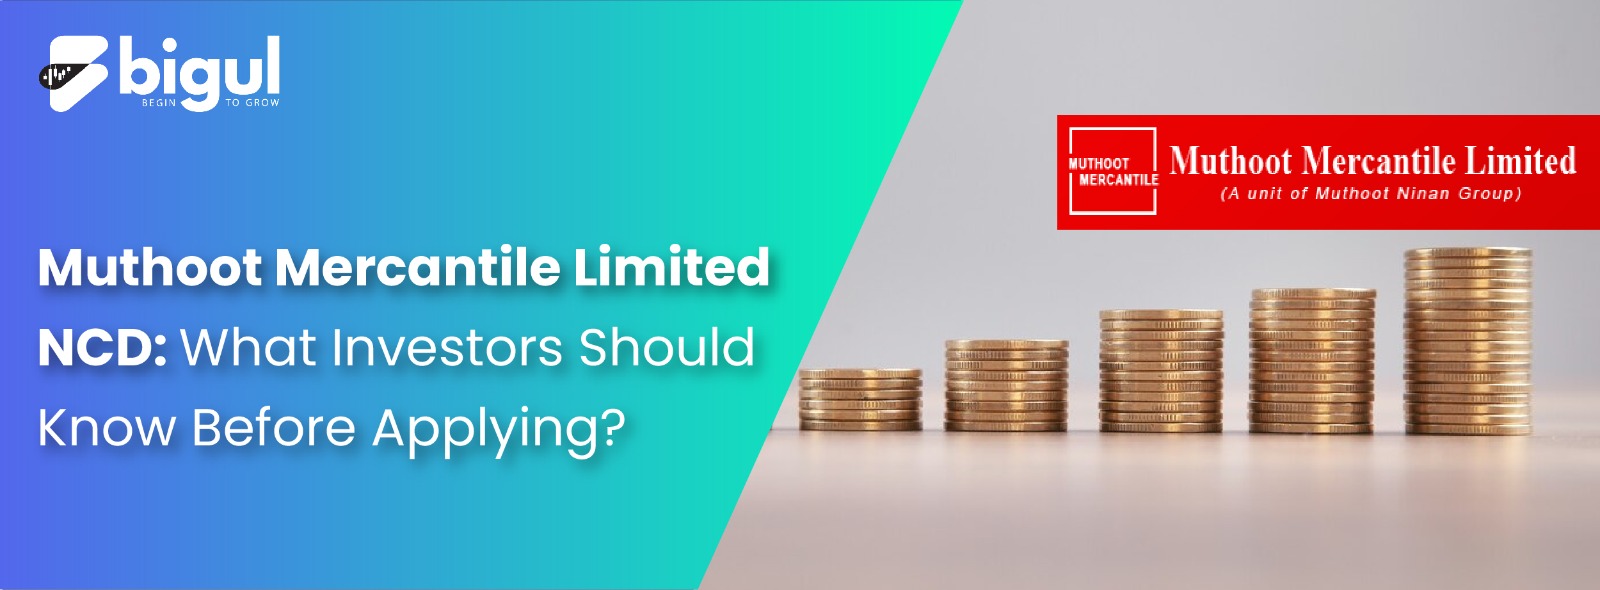 Muthoot Mercantile Limited NCD: What Investors Should Know Before Applying?